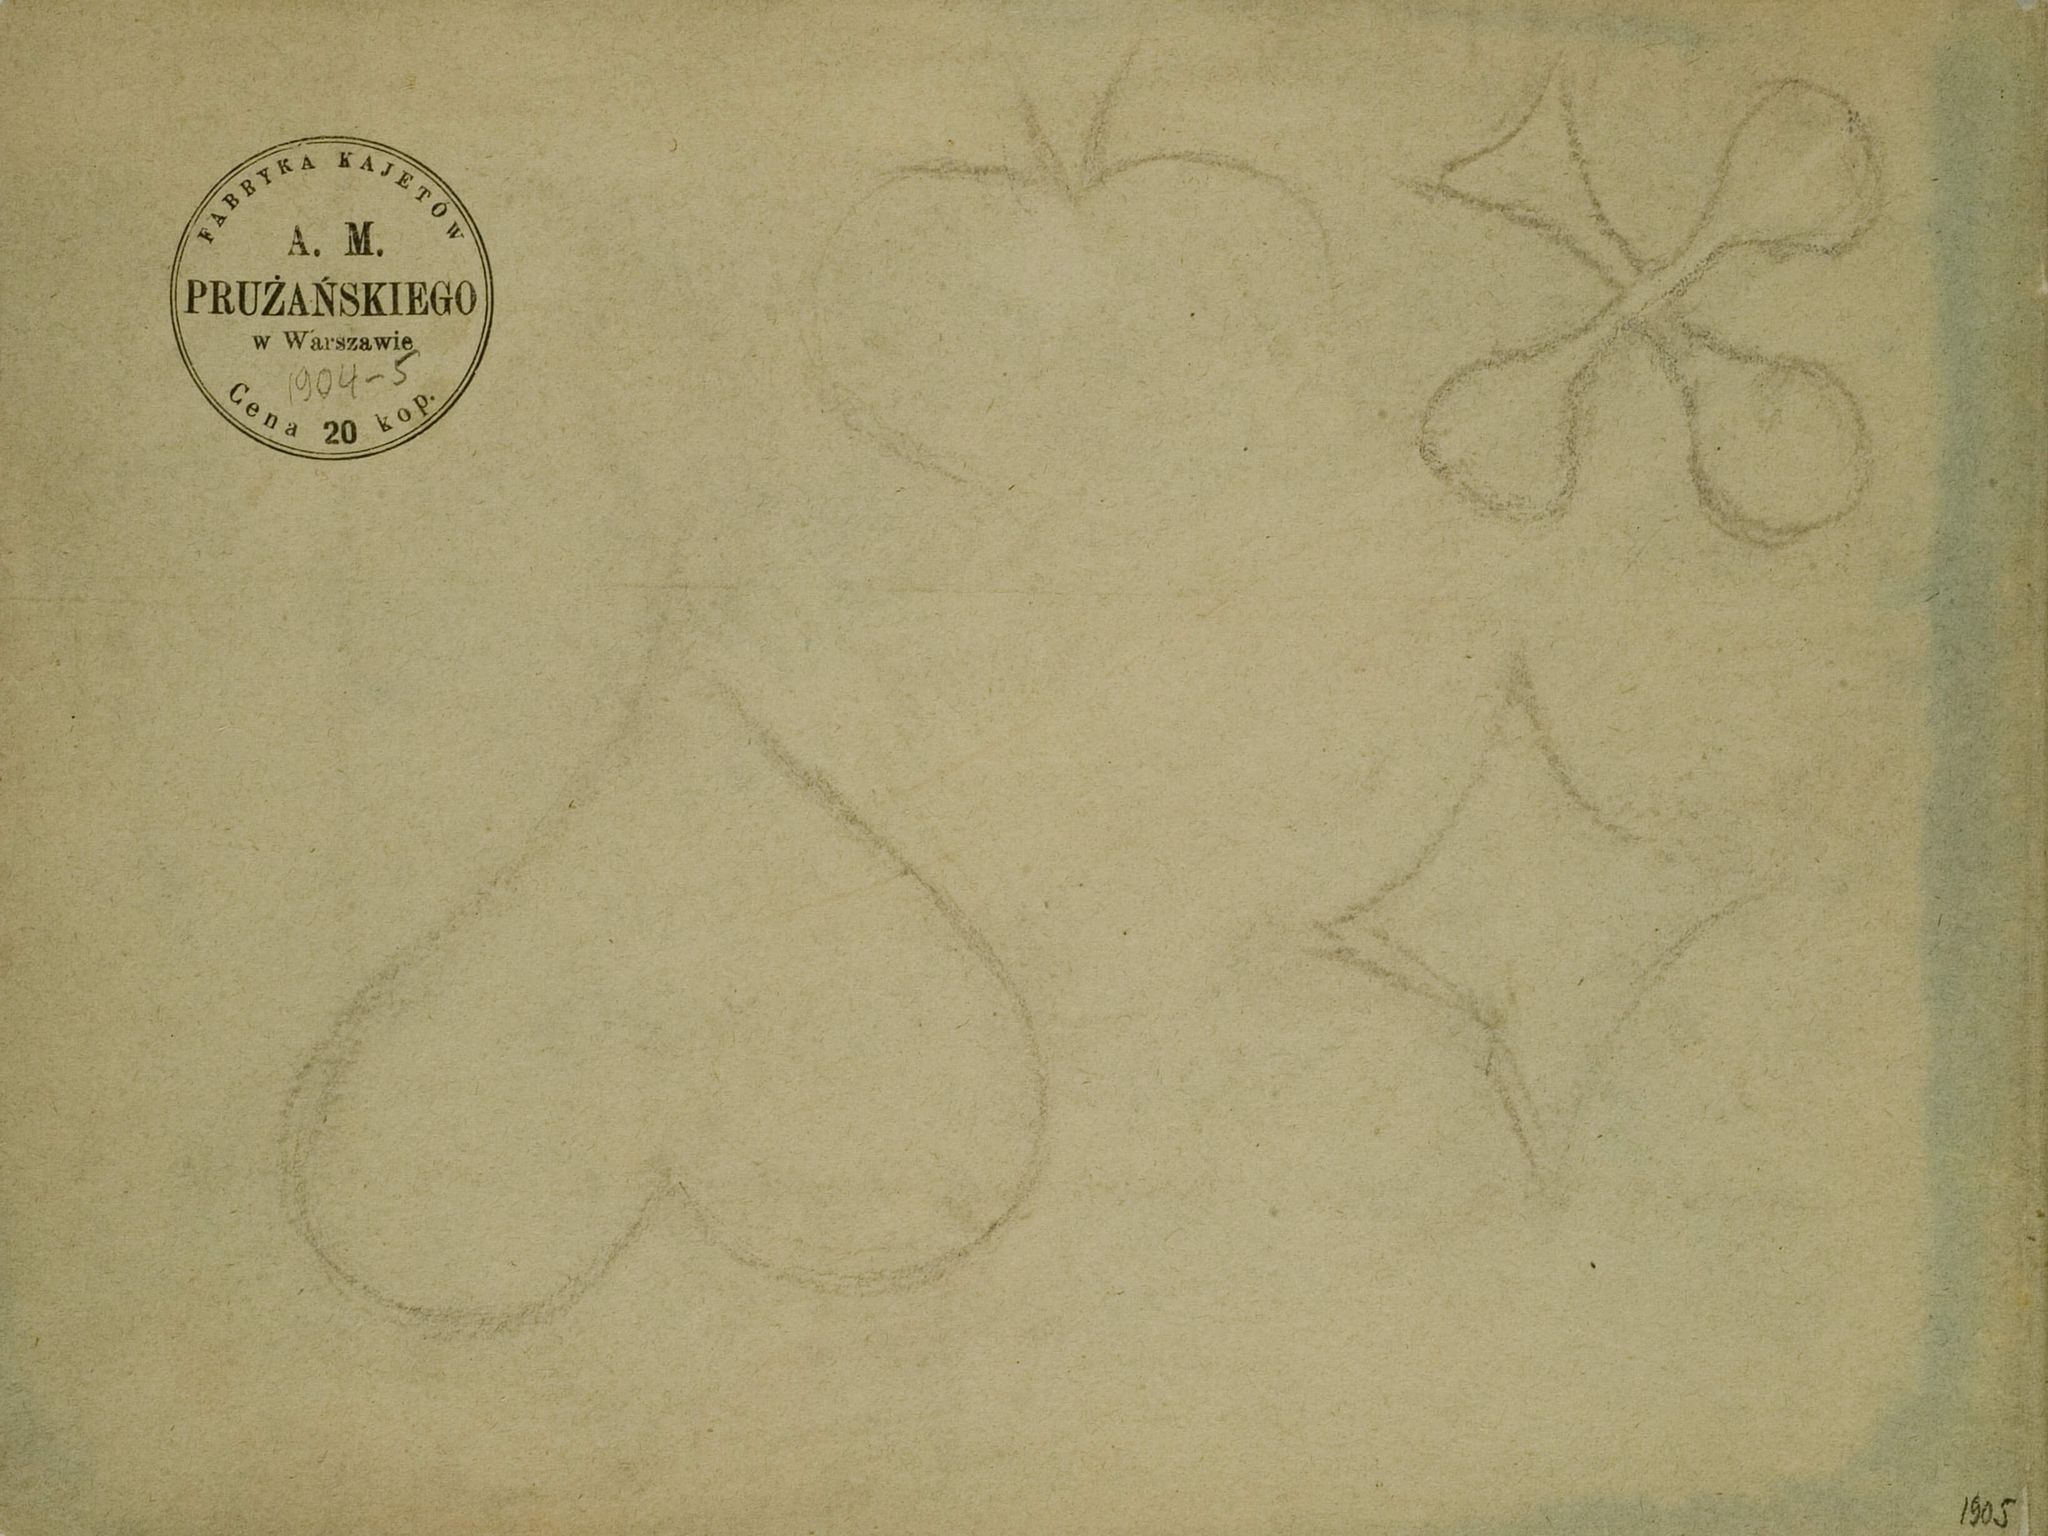 Image for: Sketches of the Card Motifs